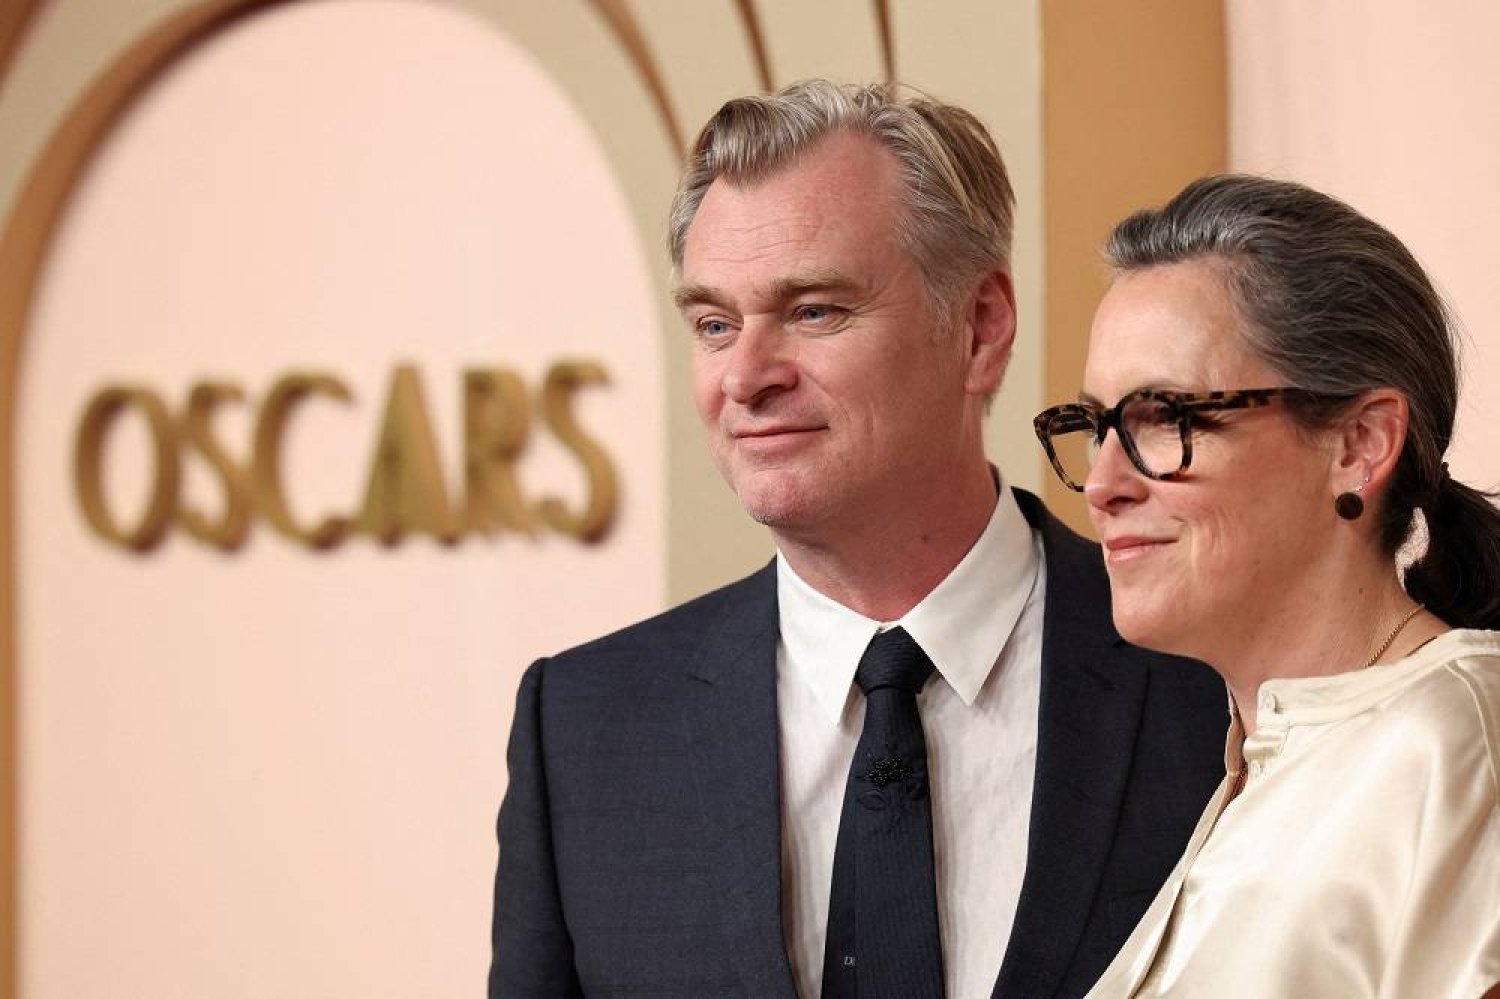 Christopher Nolan, nominated for Best Director for "Oppenheimer" which is also nominated for Best Adapted Screenplay and Best Picture, and his wife Emma Thomas, producer of "Oppenheimer", attend the Nominees Luncheon for the 96th Oscars in Beverly Hills, California, US, February 12, 2024. (Reuters)